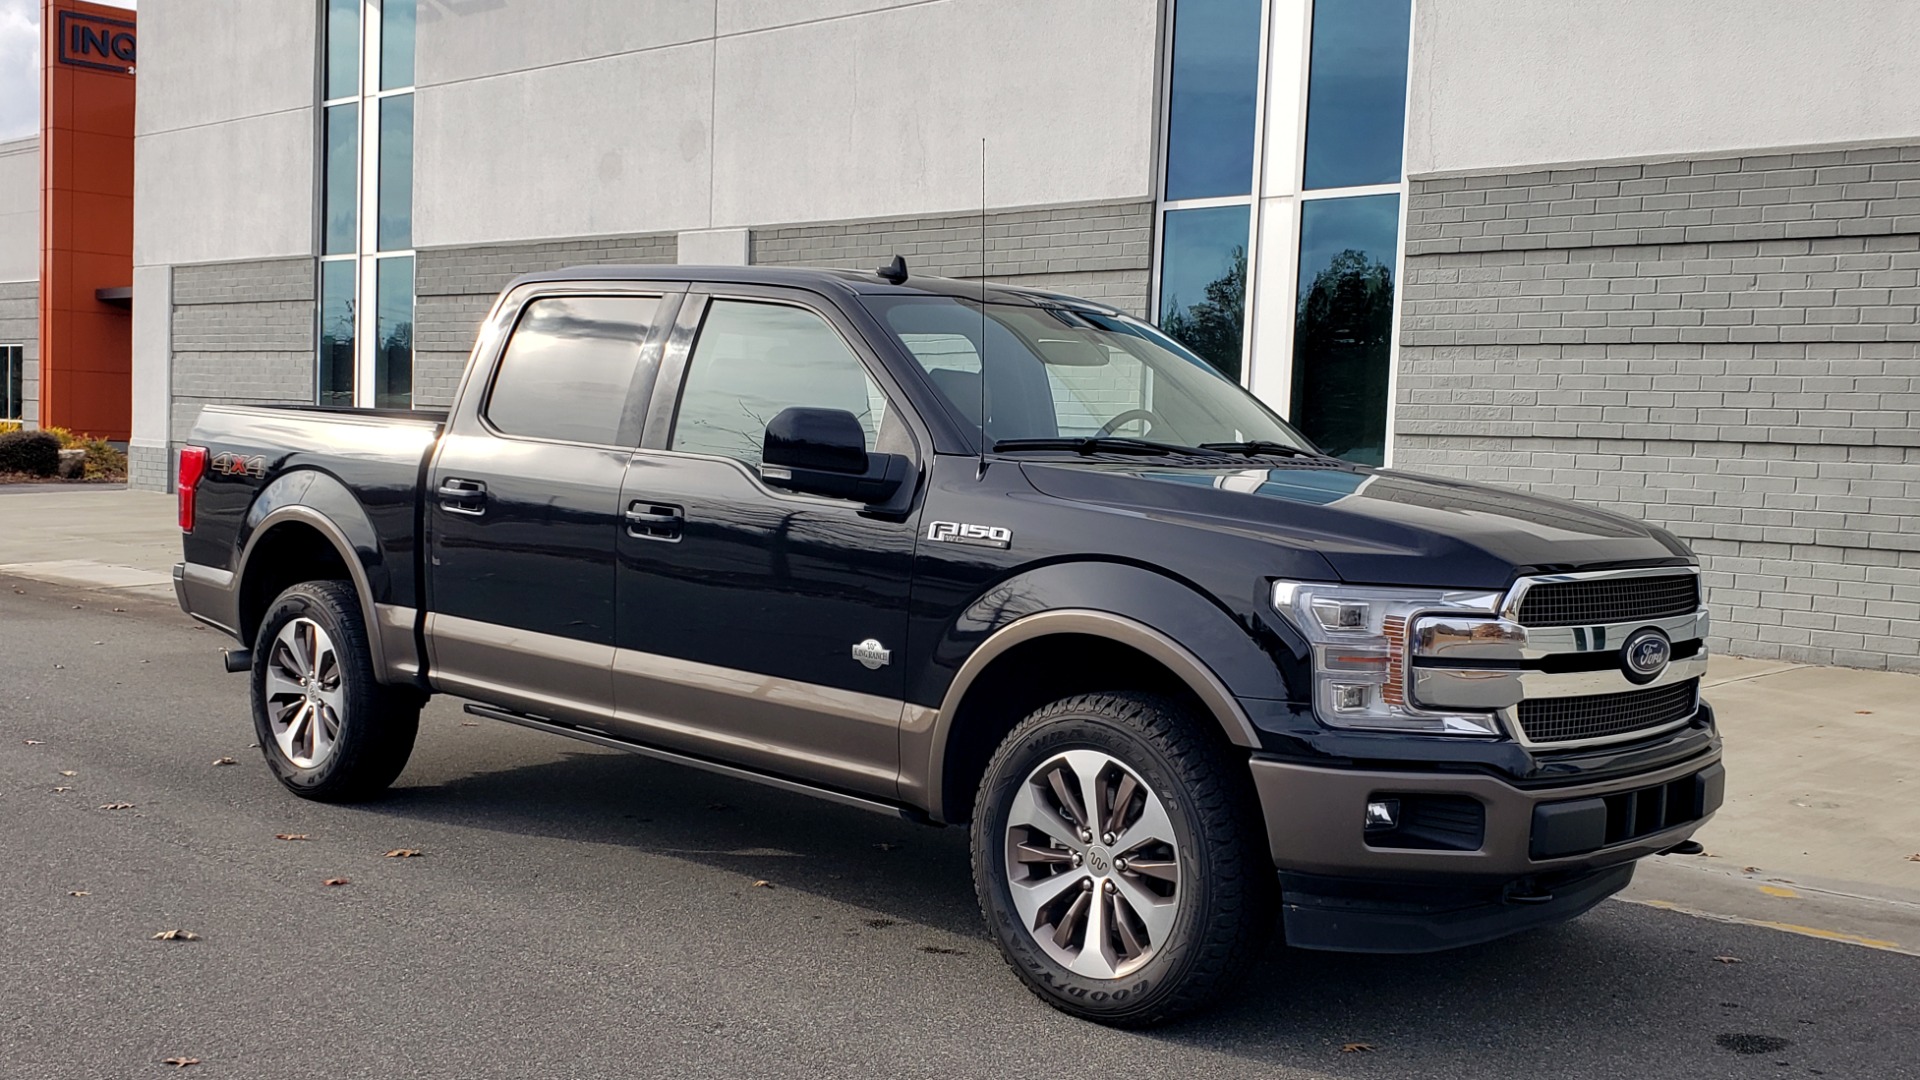 Used 2020 Ford F-150 KING RANCH 4X4 SUPERCREW / 3.5L ECOBOOST / B&O SND / REARVIEW for sale $53,995 at Formula Imports in Charlotte NC 28227 7